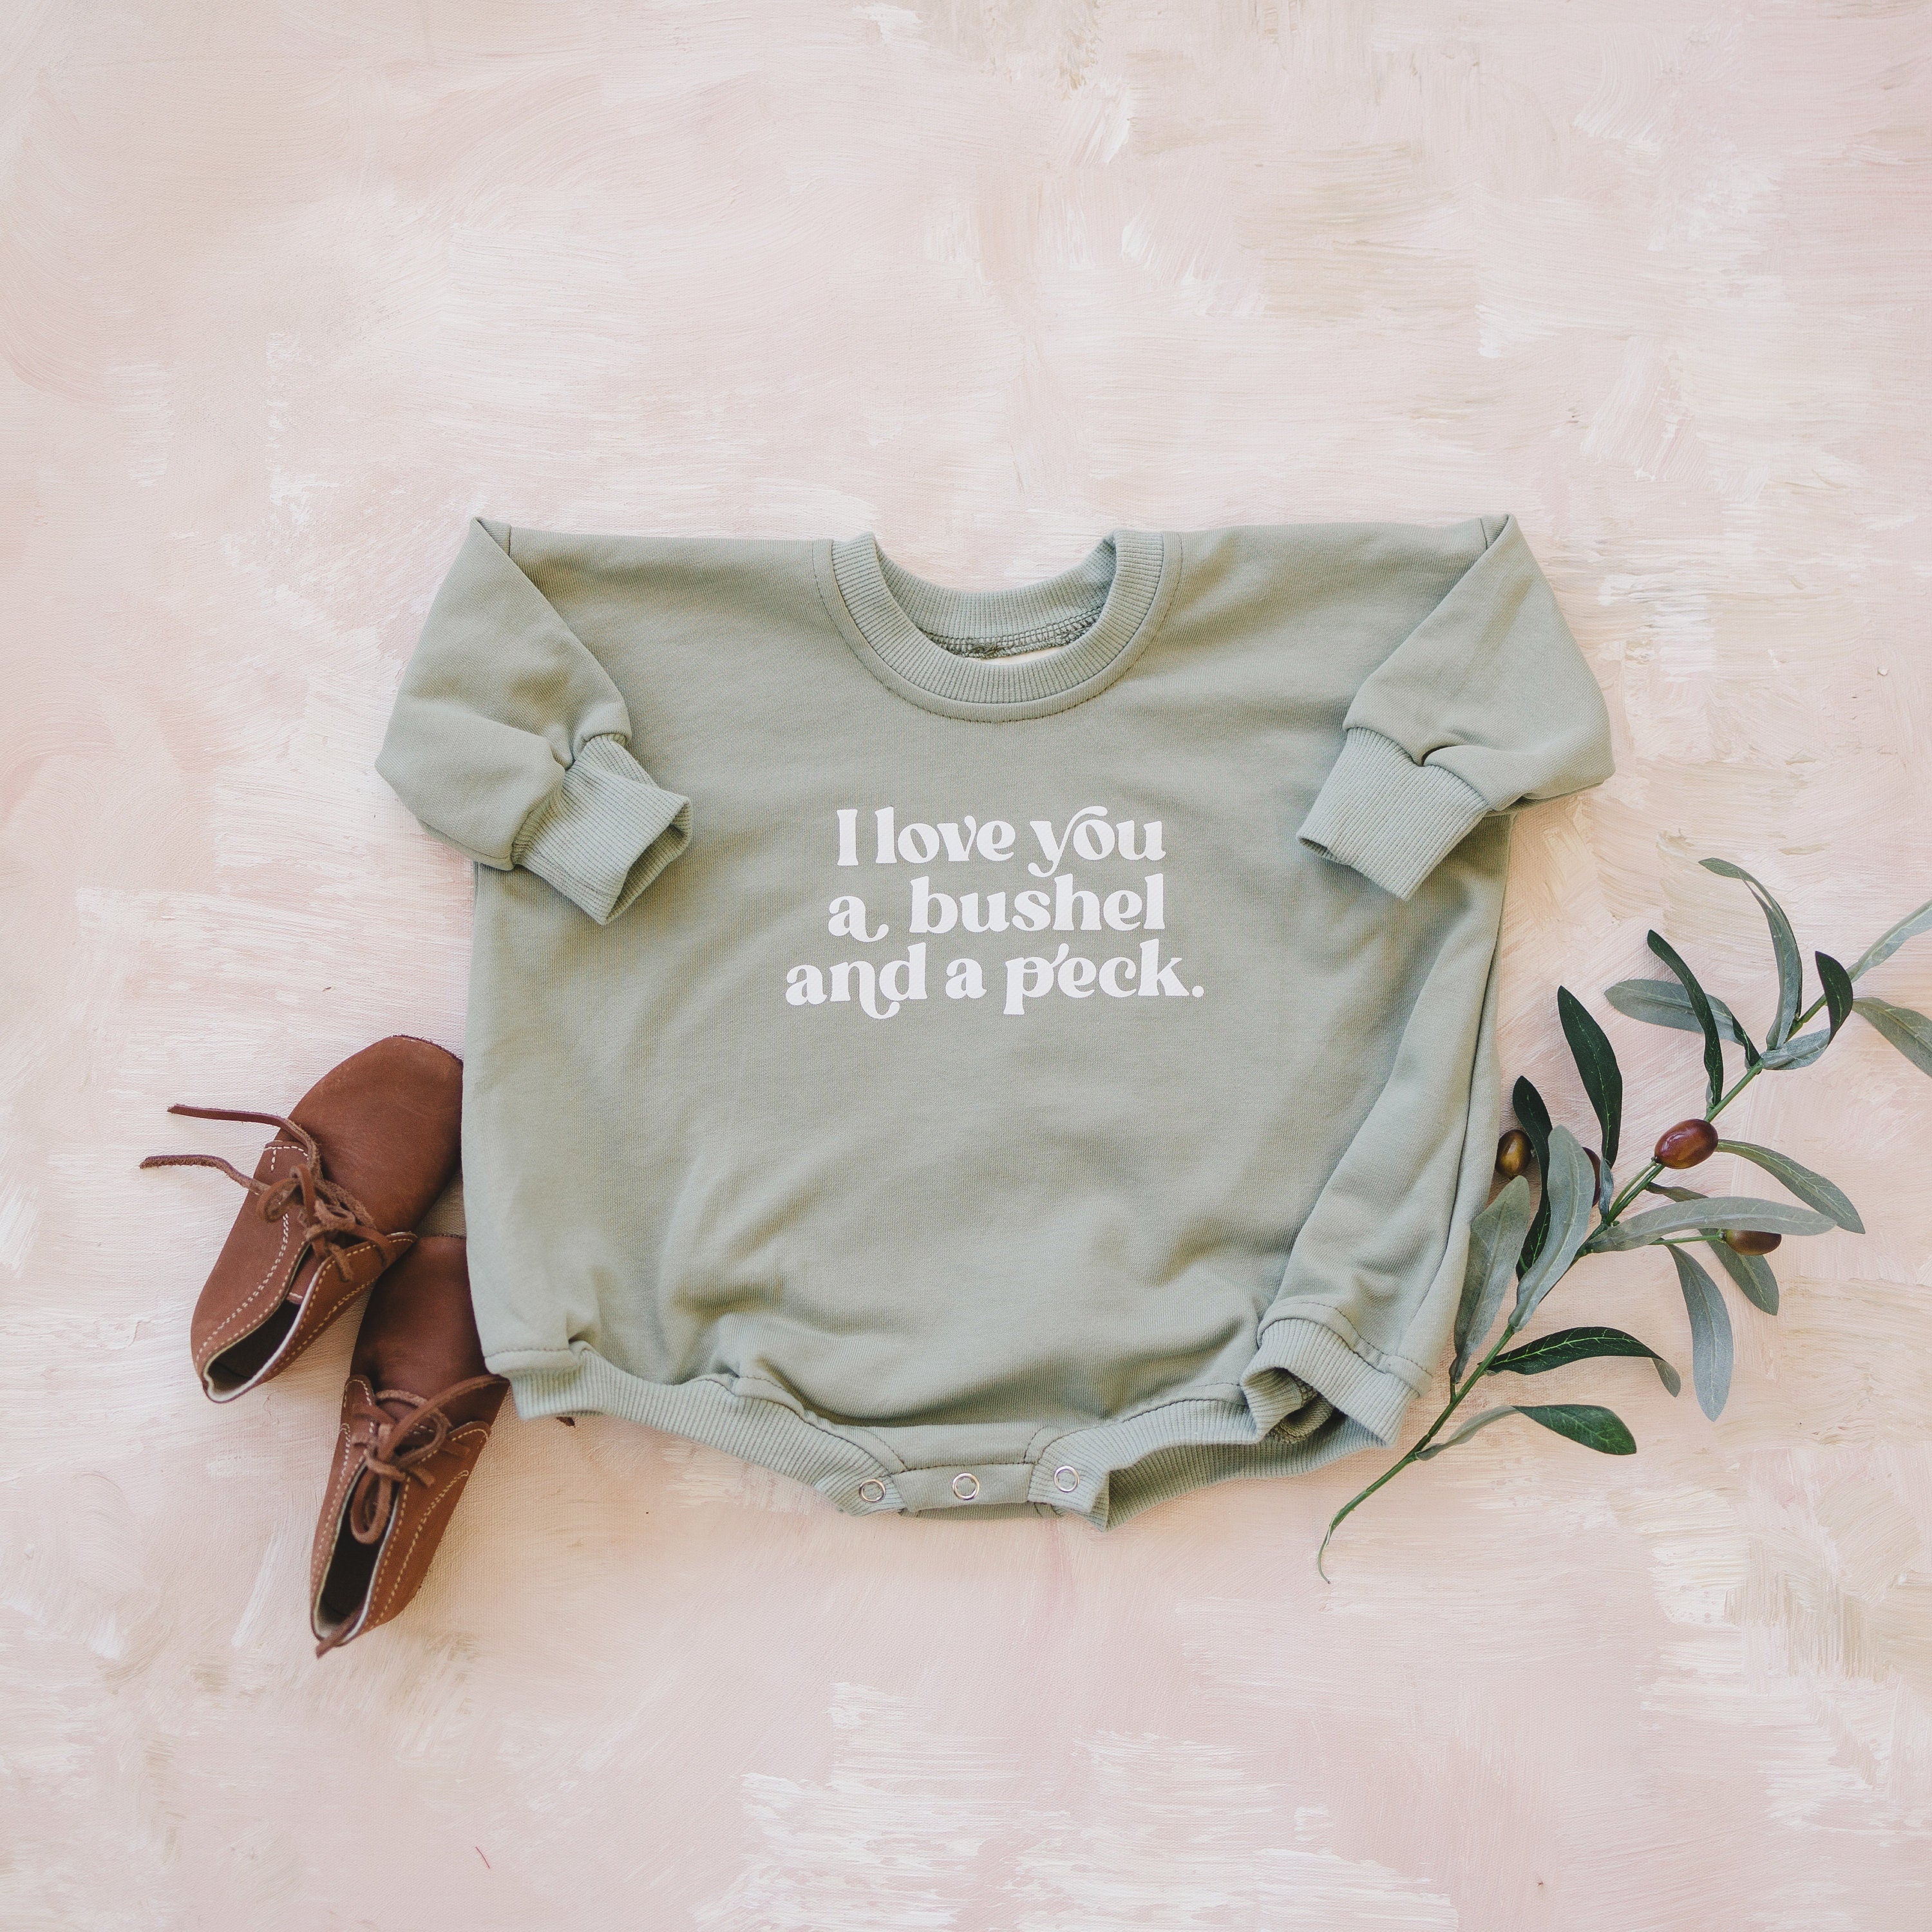 I Love You A Bushel and a Peck Oversized Sweatshirt Romper - Baby Bubble Romper - Baby Girl Outfit - Graphic Romper - Neutral Baby Clothes